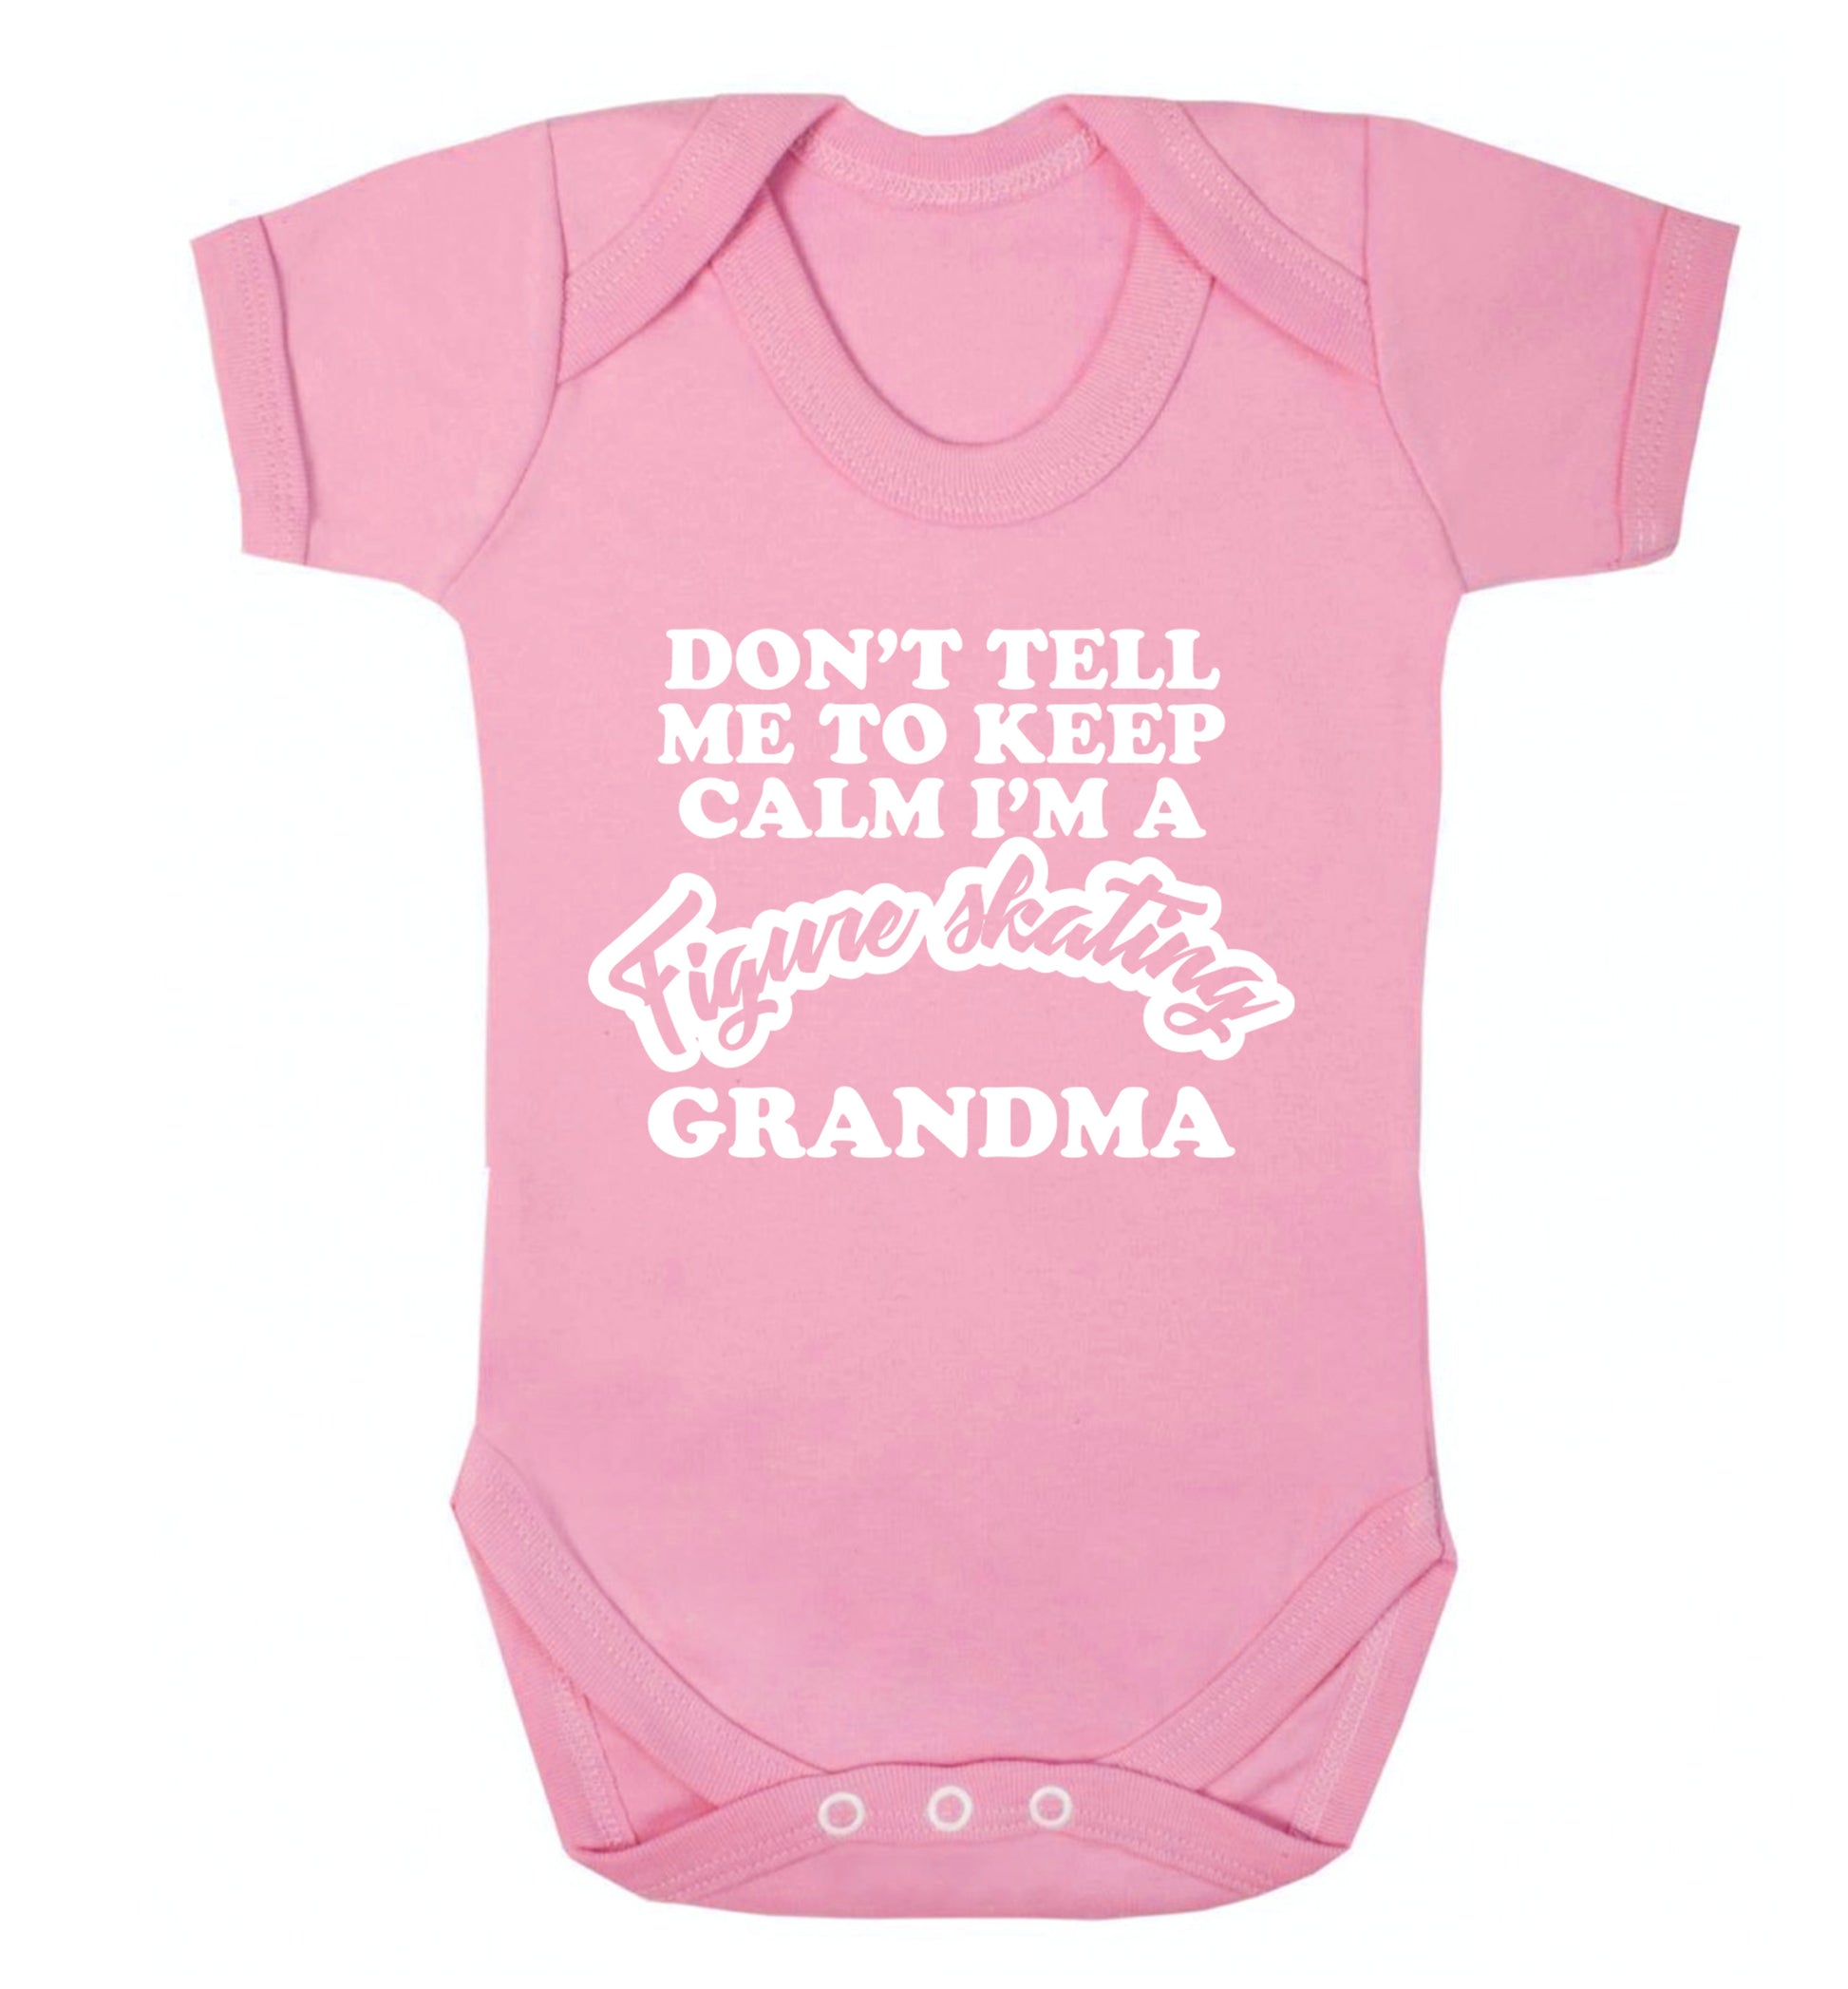 Don't tell me to keep calm I'm a figure skating grandma Baby Vest pale pink 18-24 months